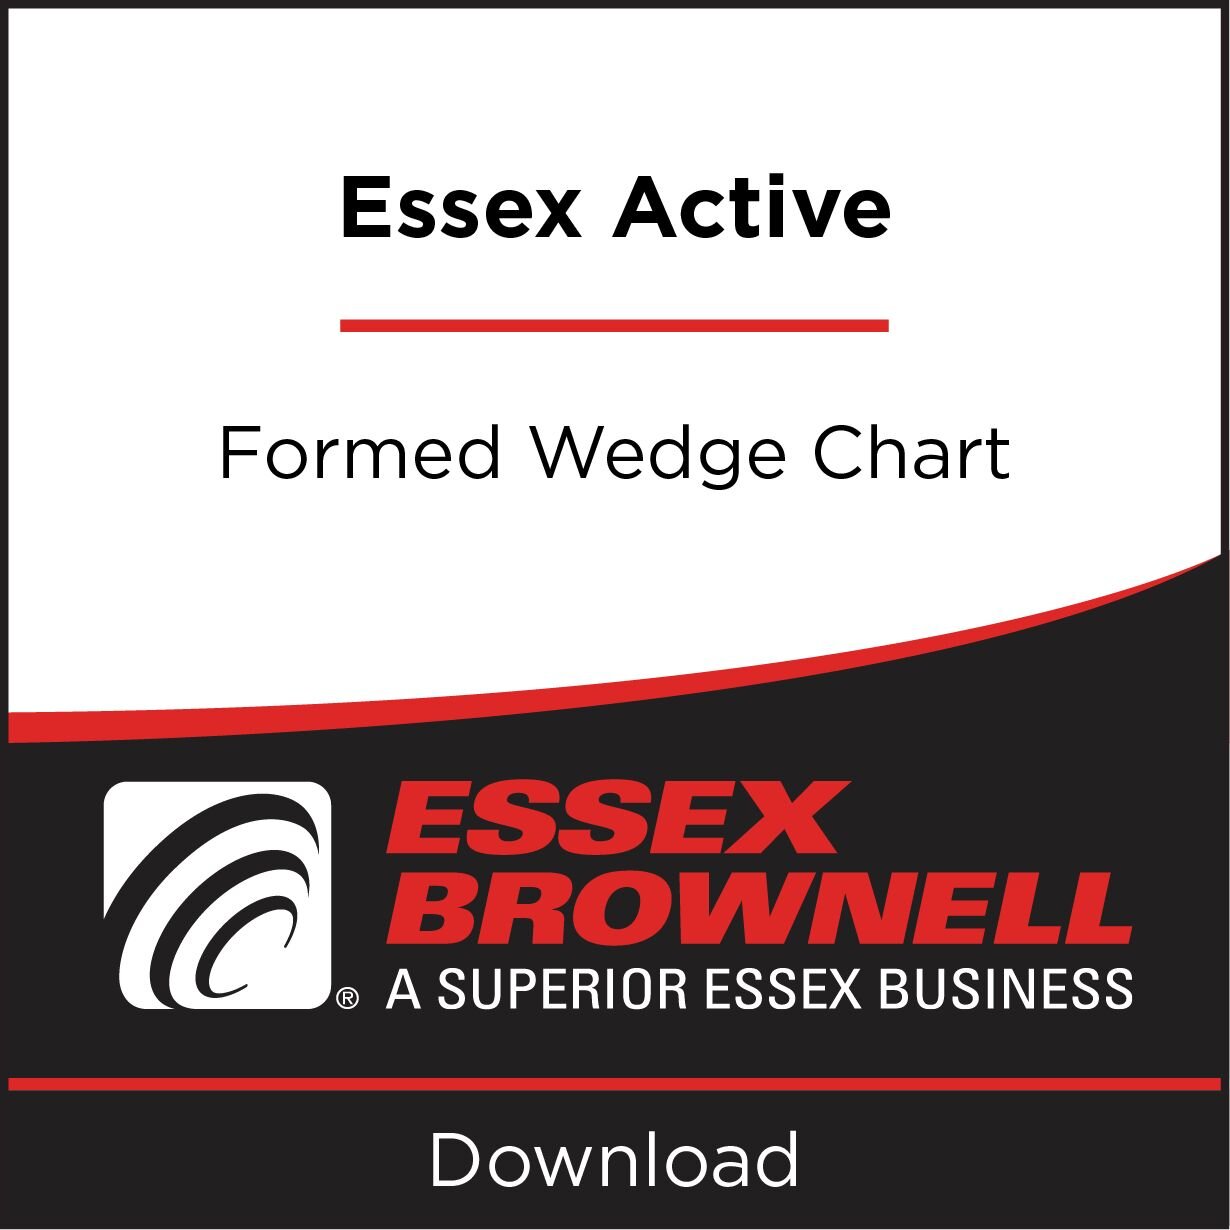 Essex Active Formed Wedge Chart